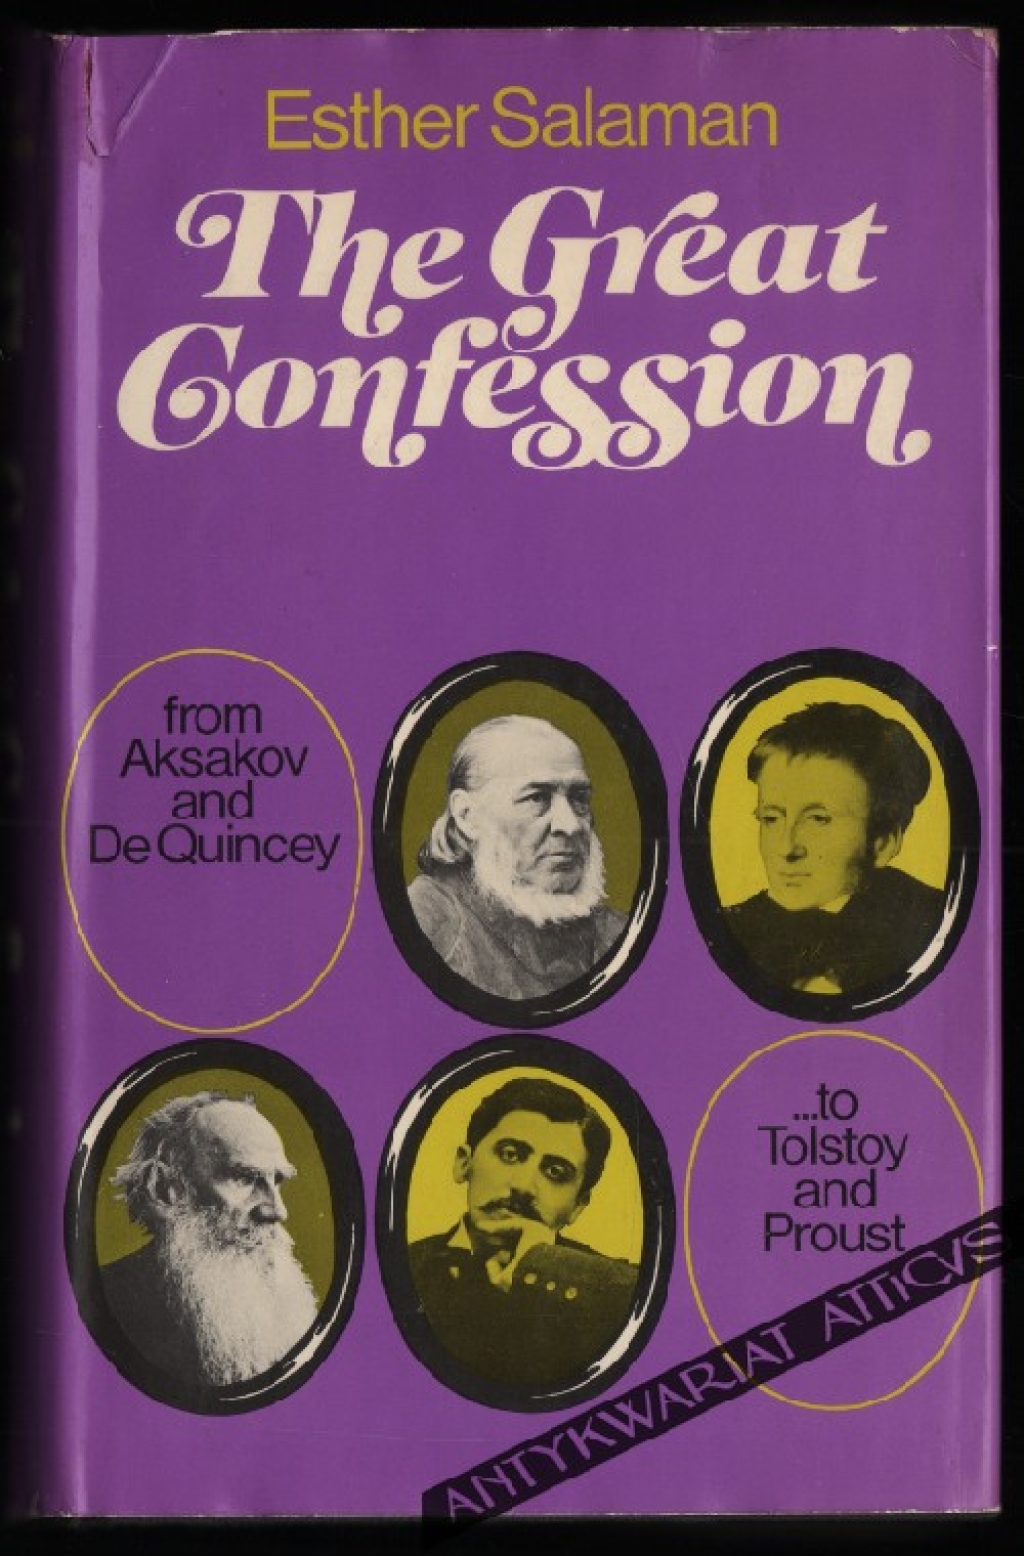 The Great Confession. From Aksakov and De Quincey to Tolstoy and Proust